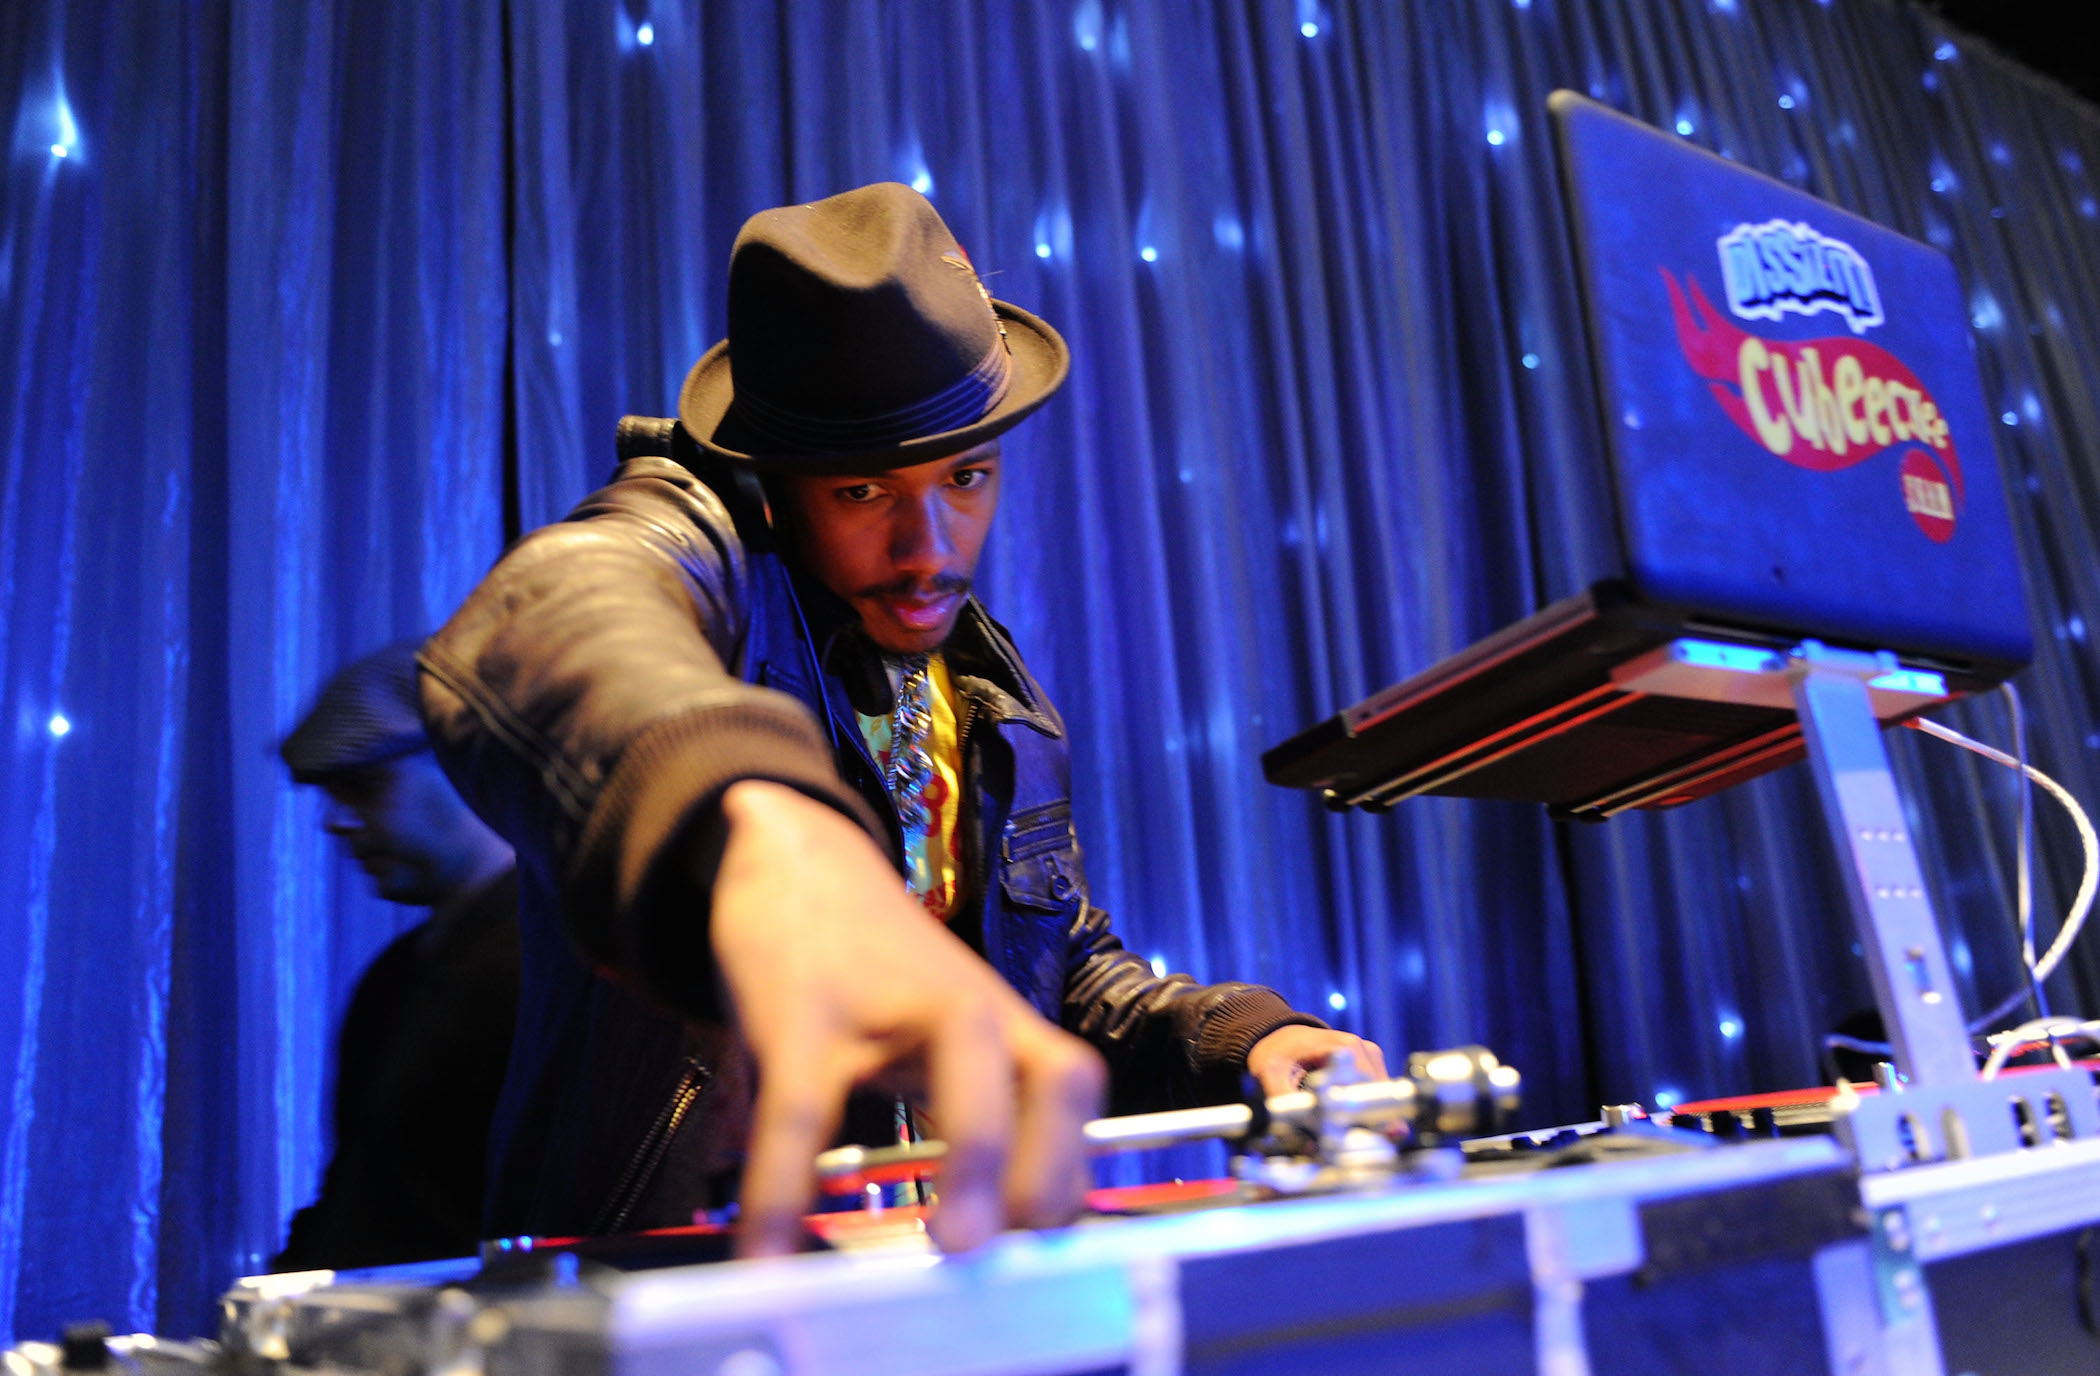 Nick Cannon DJing his birthday party. Nick Cannon's age is 30 in the photo